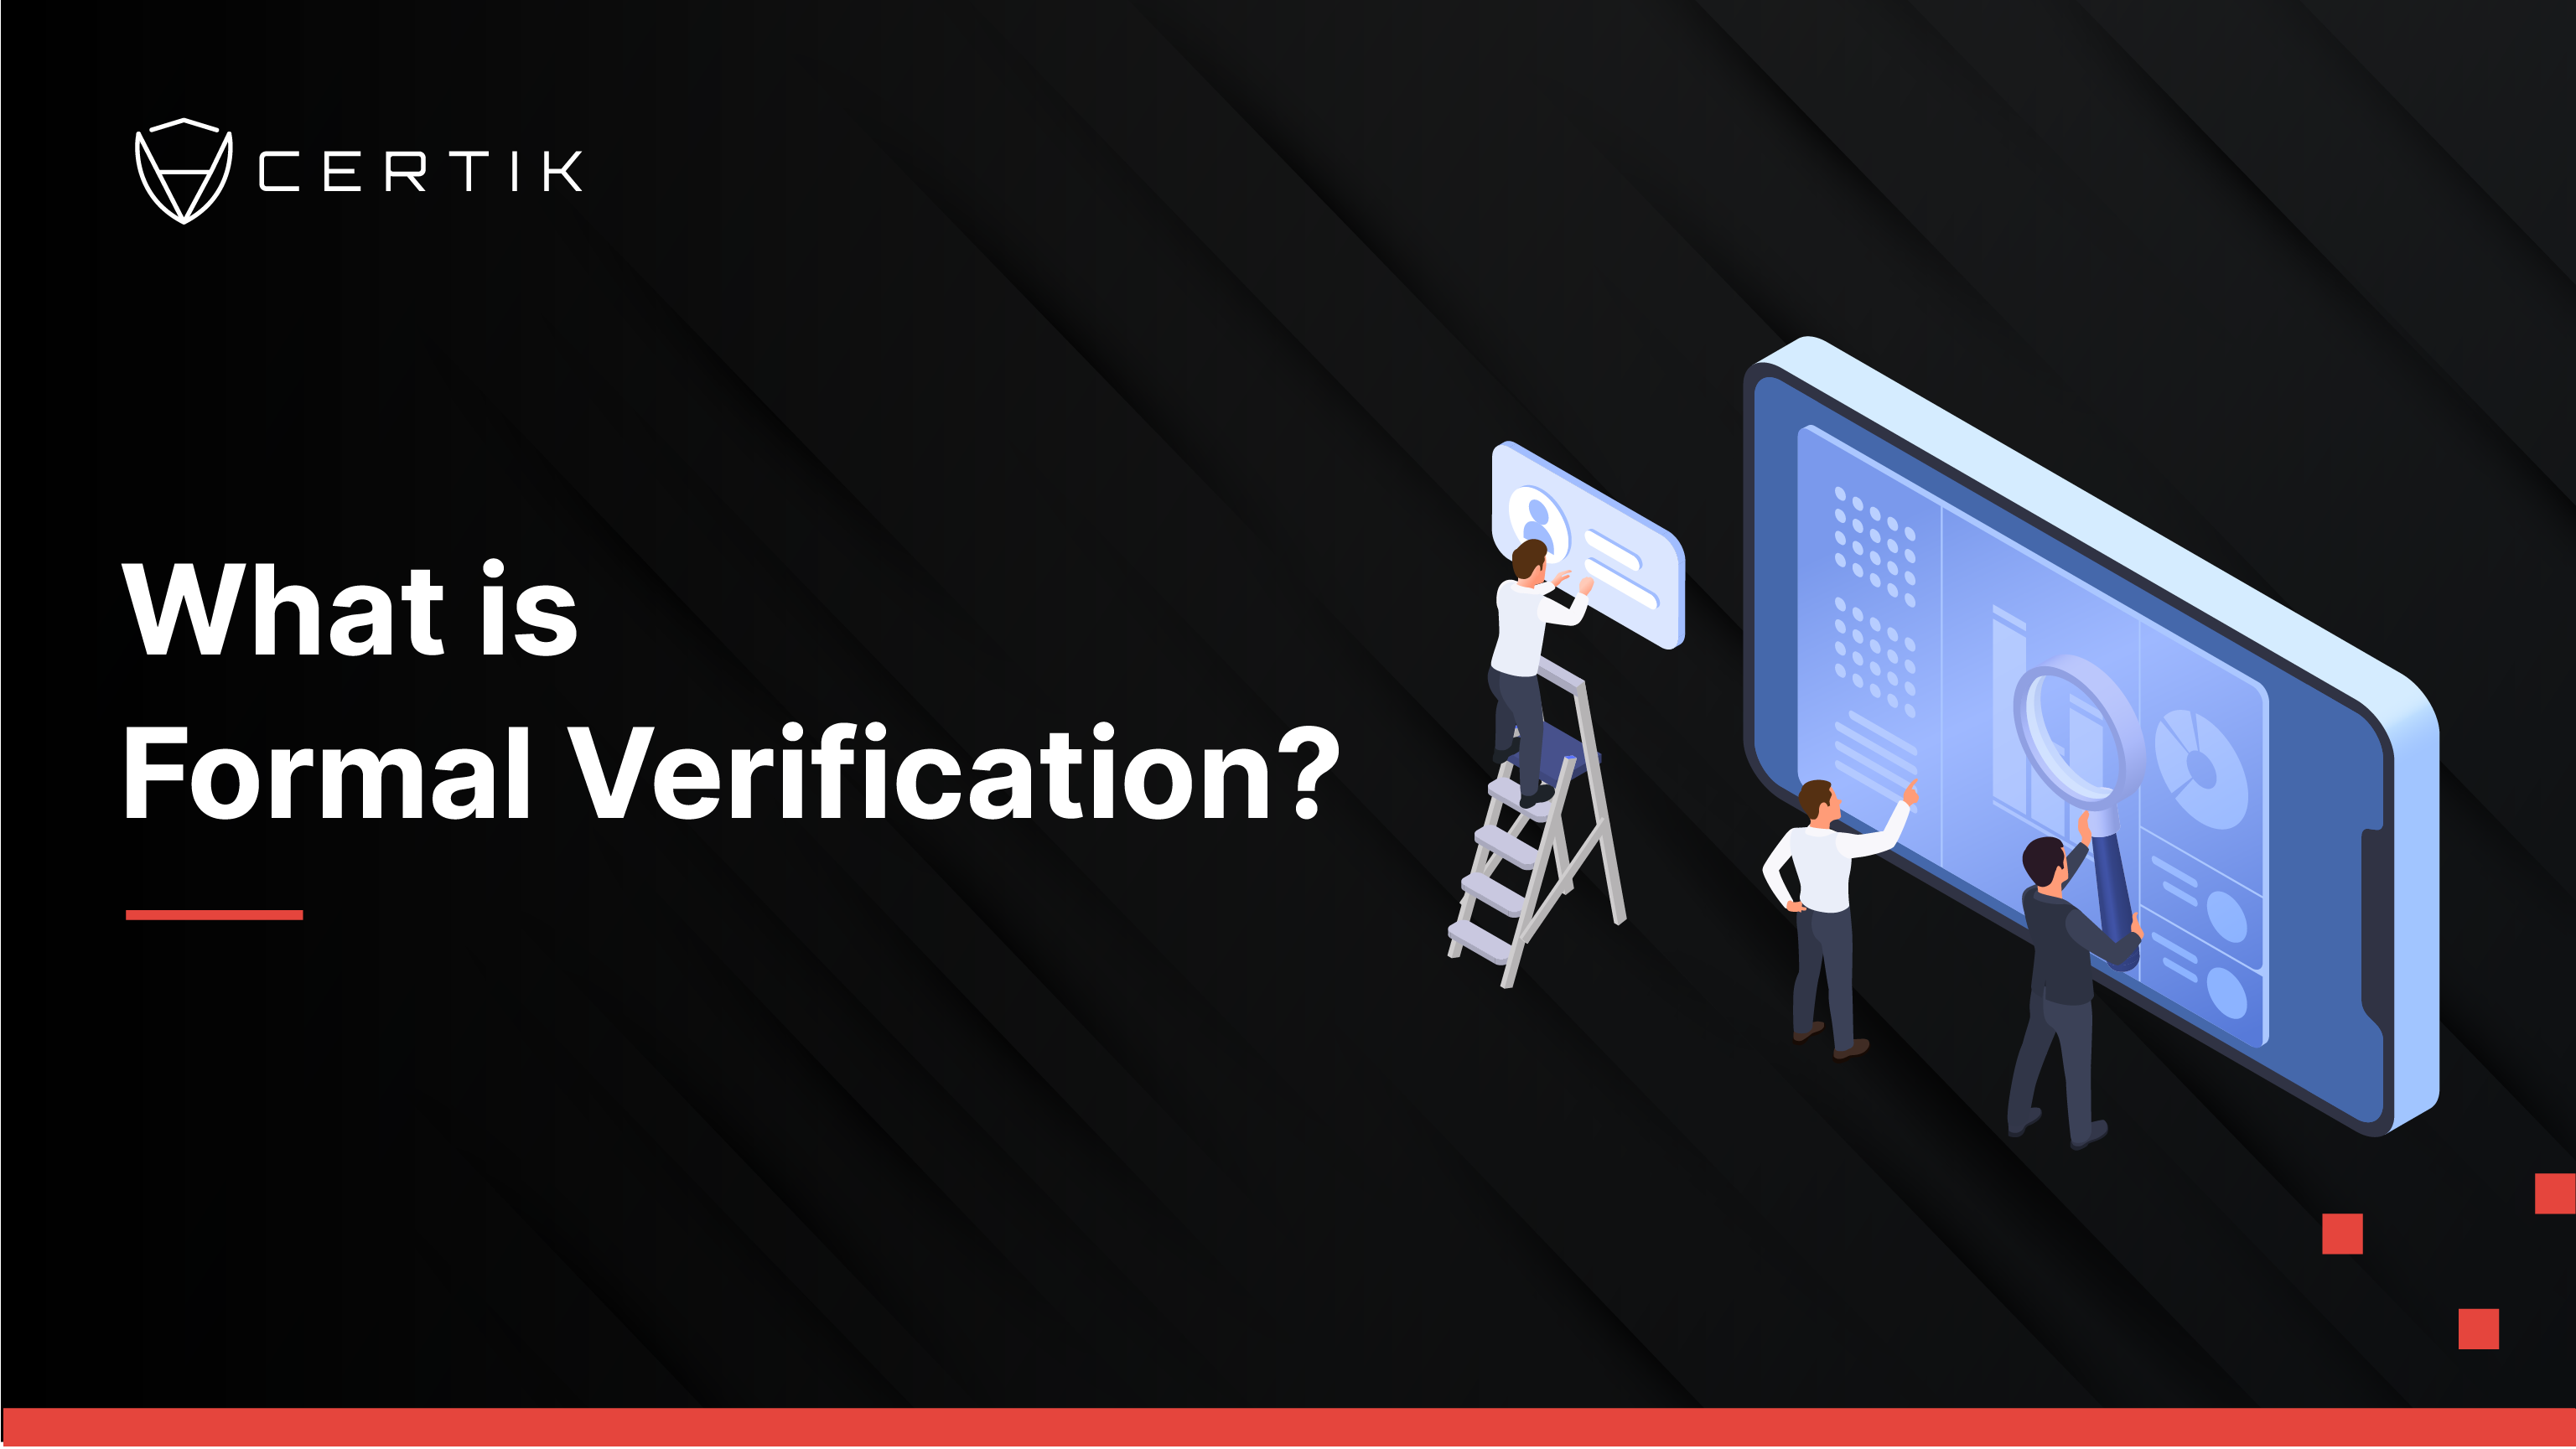 What is Formal Verification?